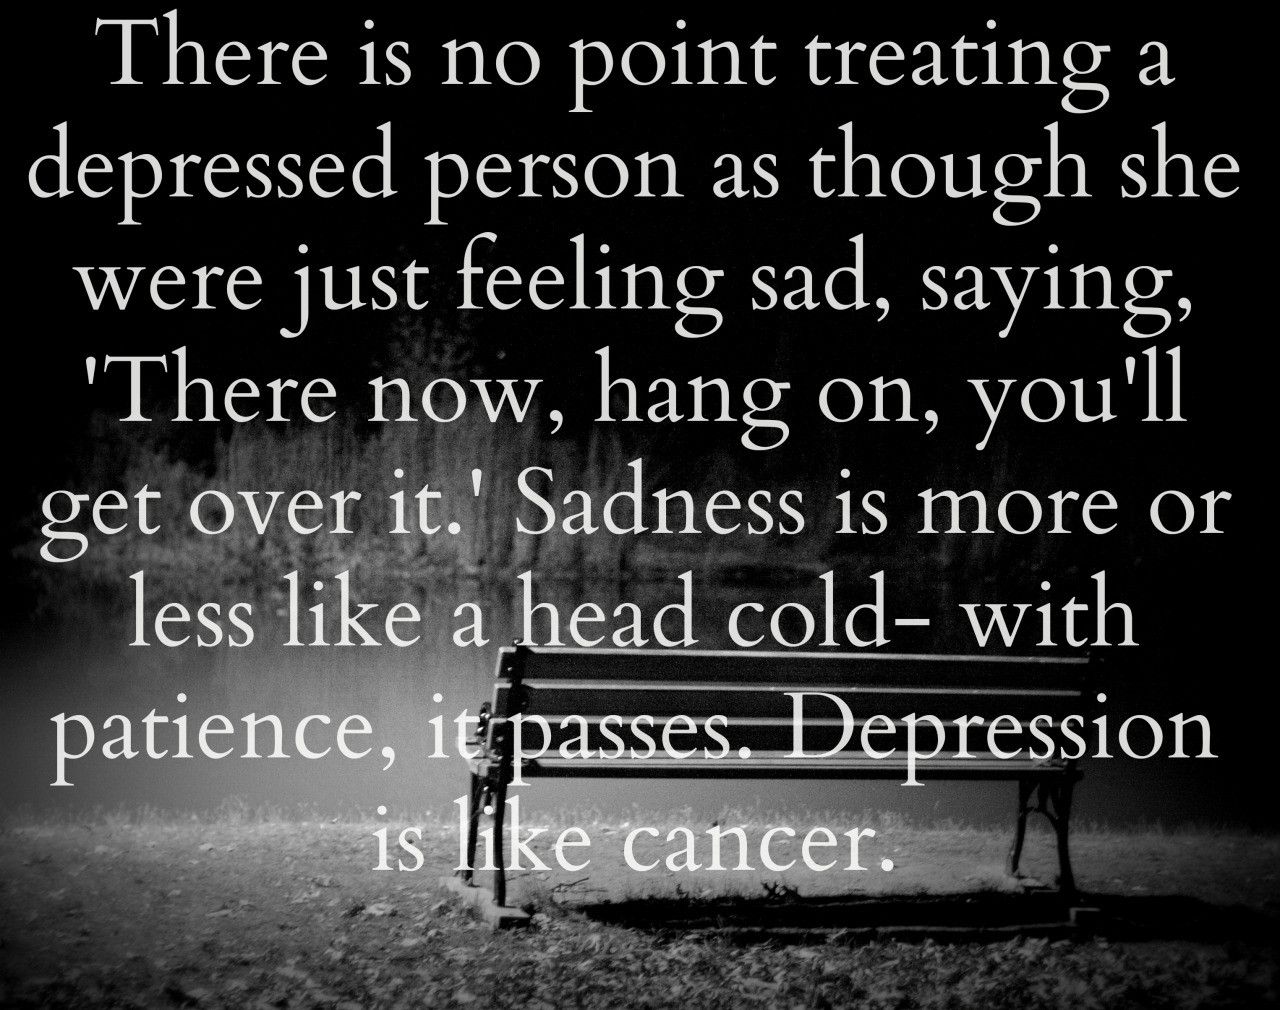 Sad And Depressed Quotes
 Life As a Teen depression quotes